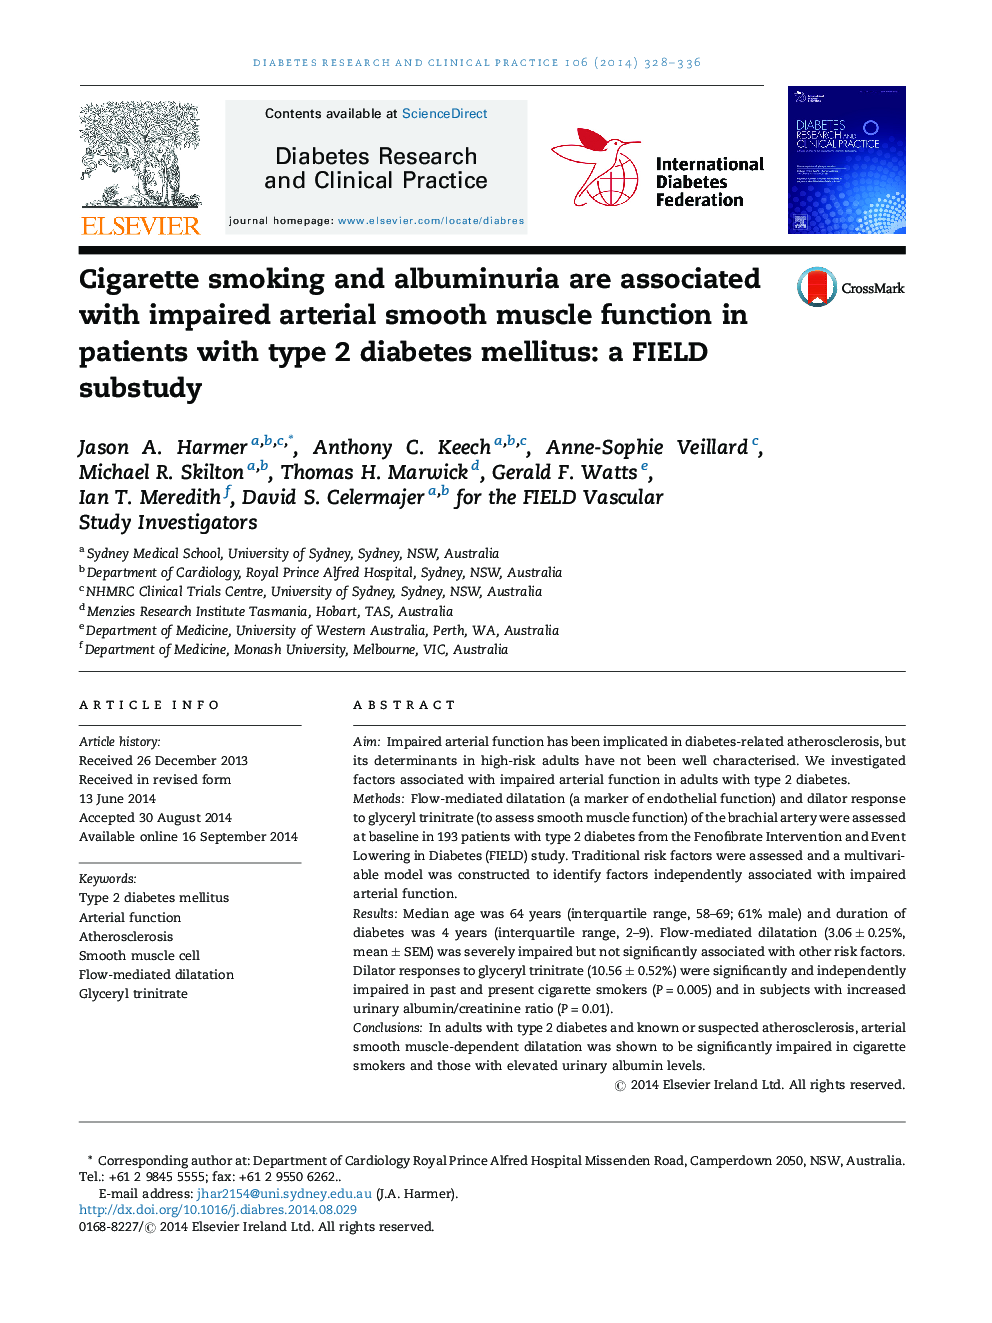 Cigarette smoking and albuminuria are associated with impaired arterial smooth muscle function in patients with type 2 diabetes mellitus: a FIELD substudy